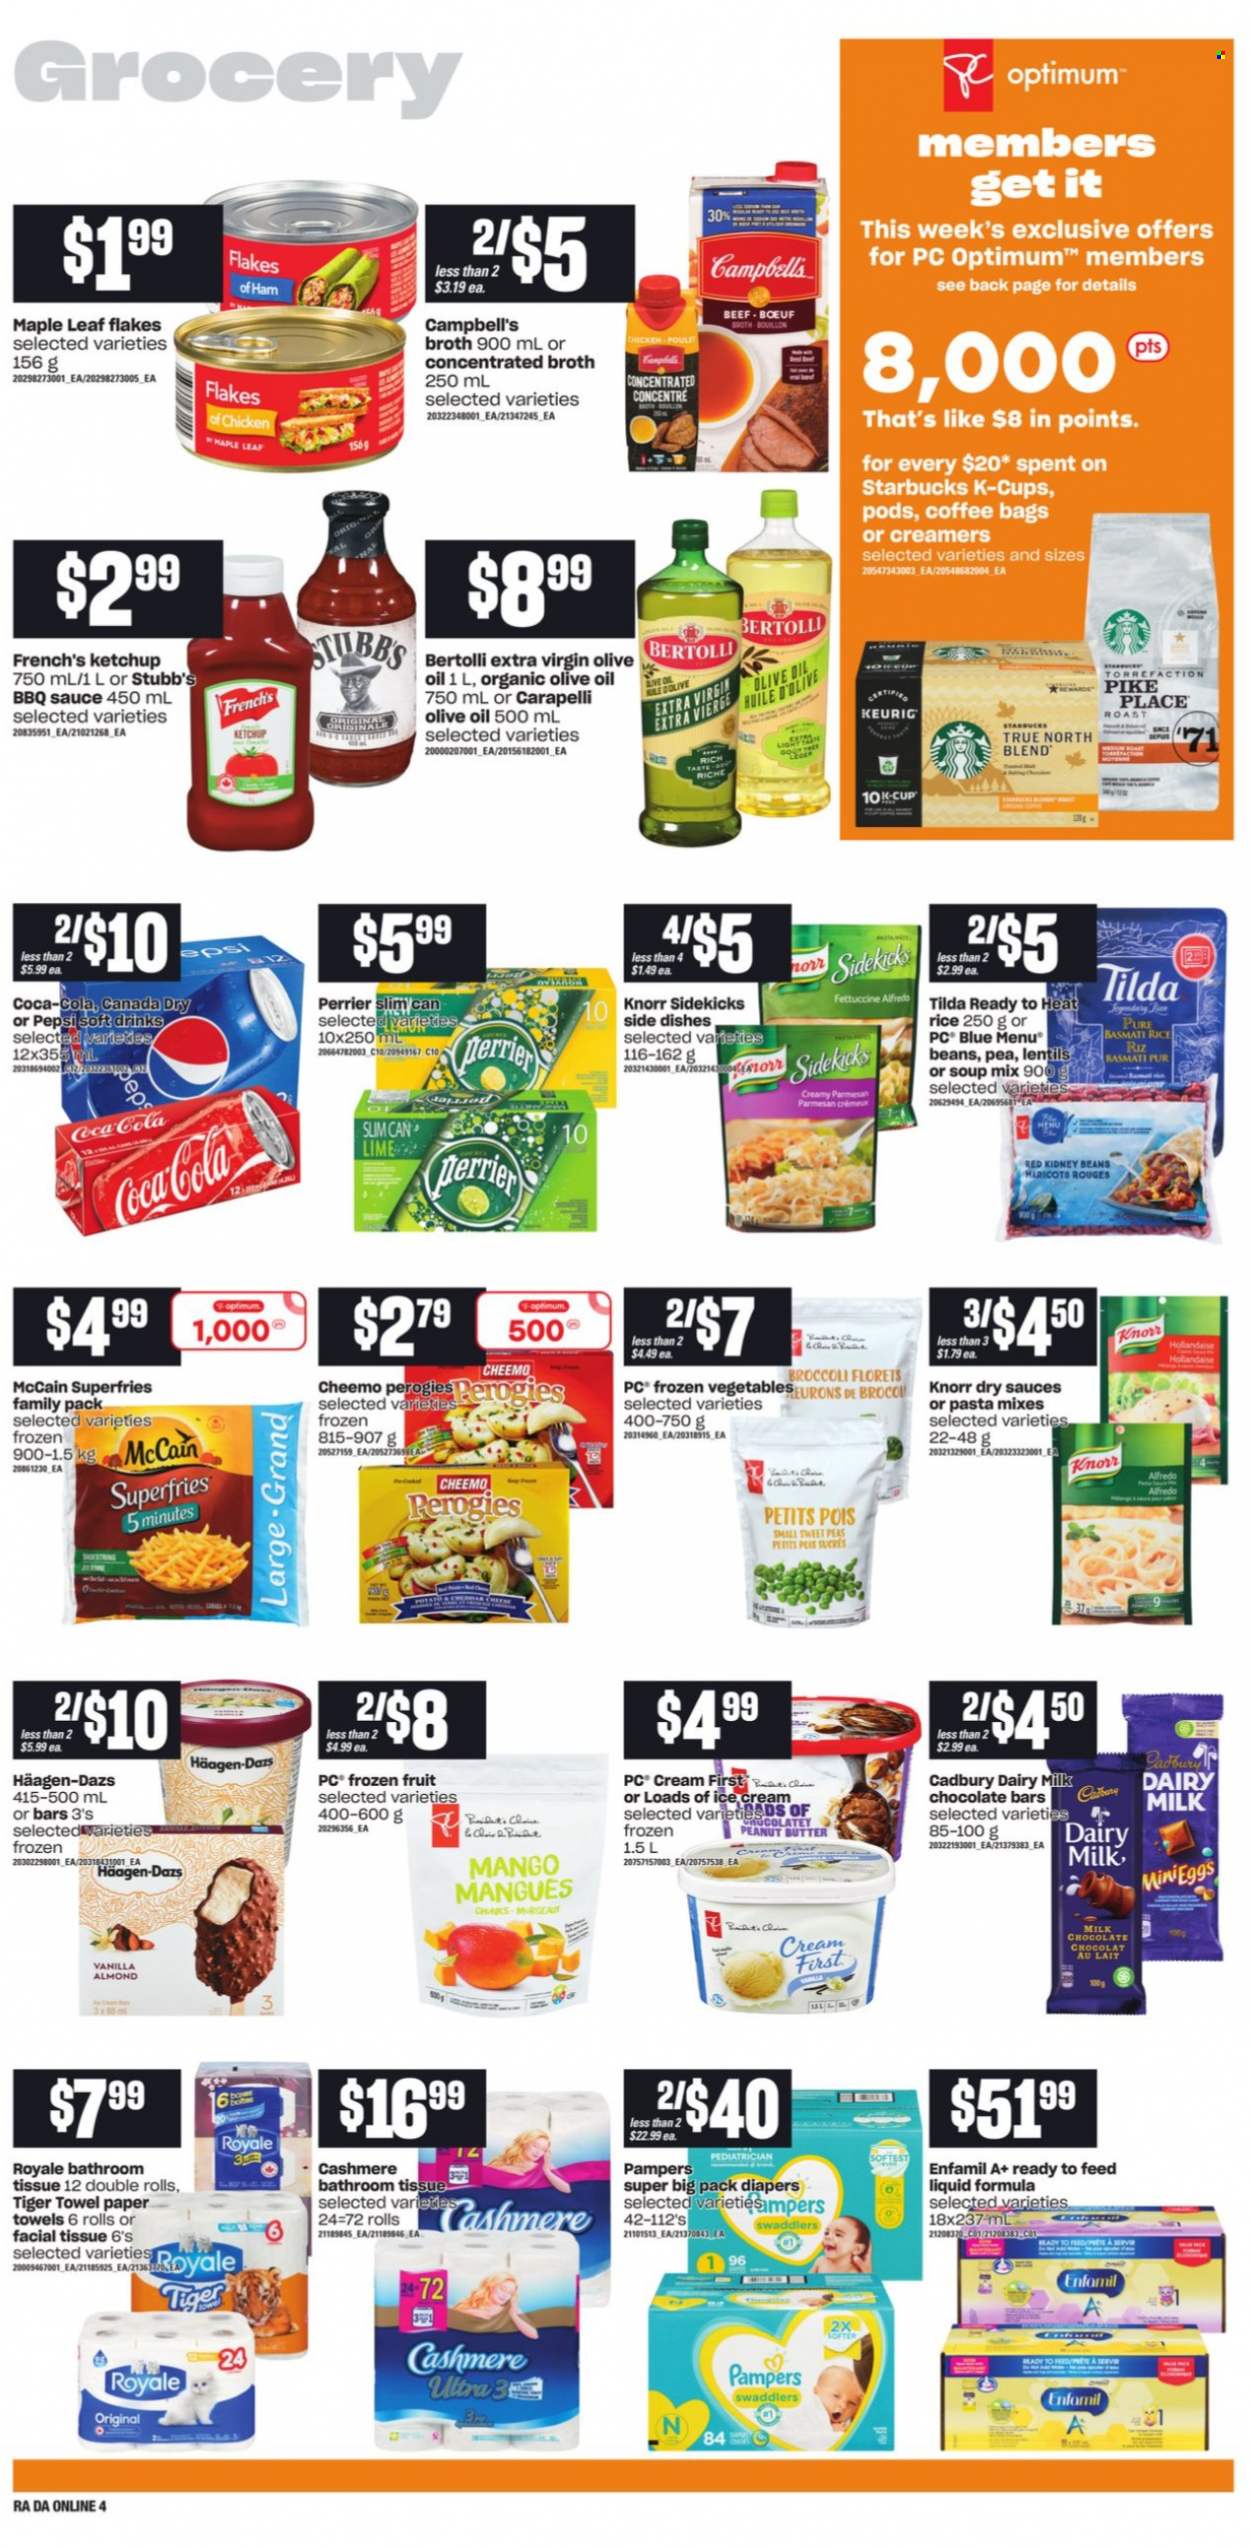 thumbnail - Atlantic Superstore Flyer - October 21, 2021 - October 27, 2021 - Sales products - broccoli, peas, Campbell's, soup mix, soup, Bertolli, ham, parmesan, ice cream, Häagen-Dazs, McCain, potato fries, milk chocolate, Cadbury, Dairy Milk, chocolate bar, bouillon, broth, lentils, kidney beans, basmati rice, rice, BBQ sauce, extra virgin olive oil, olive oil, oil, peanut butter, Canada Dry, Coca-Cola, Pepsi, soft drink, Perrier, coffee, coffee capsules, Starbucks, K-Cups, Keurig, Enfamil, nappies, bath tissue, kitchen towels, paper towels, Optimum, Knorr, ketchup, Pampers. Page 8.